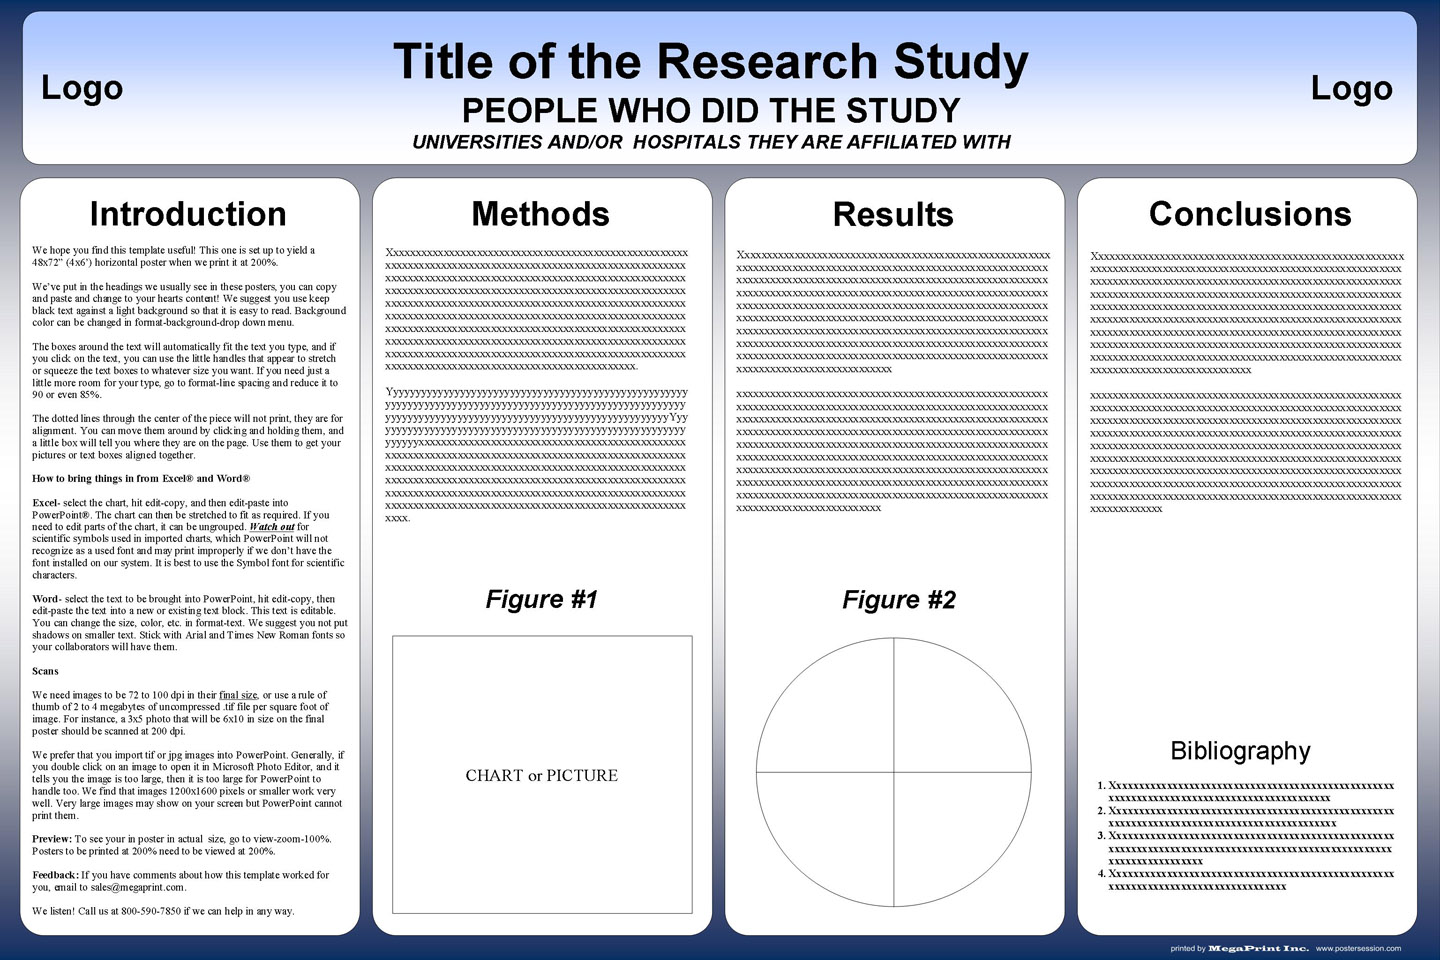 Free Powerpoint Scientific Research Poster Templates for Printing